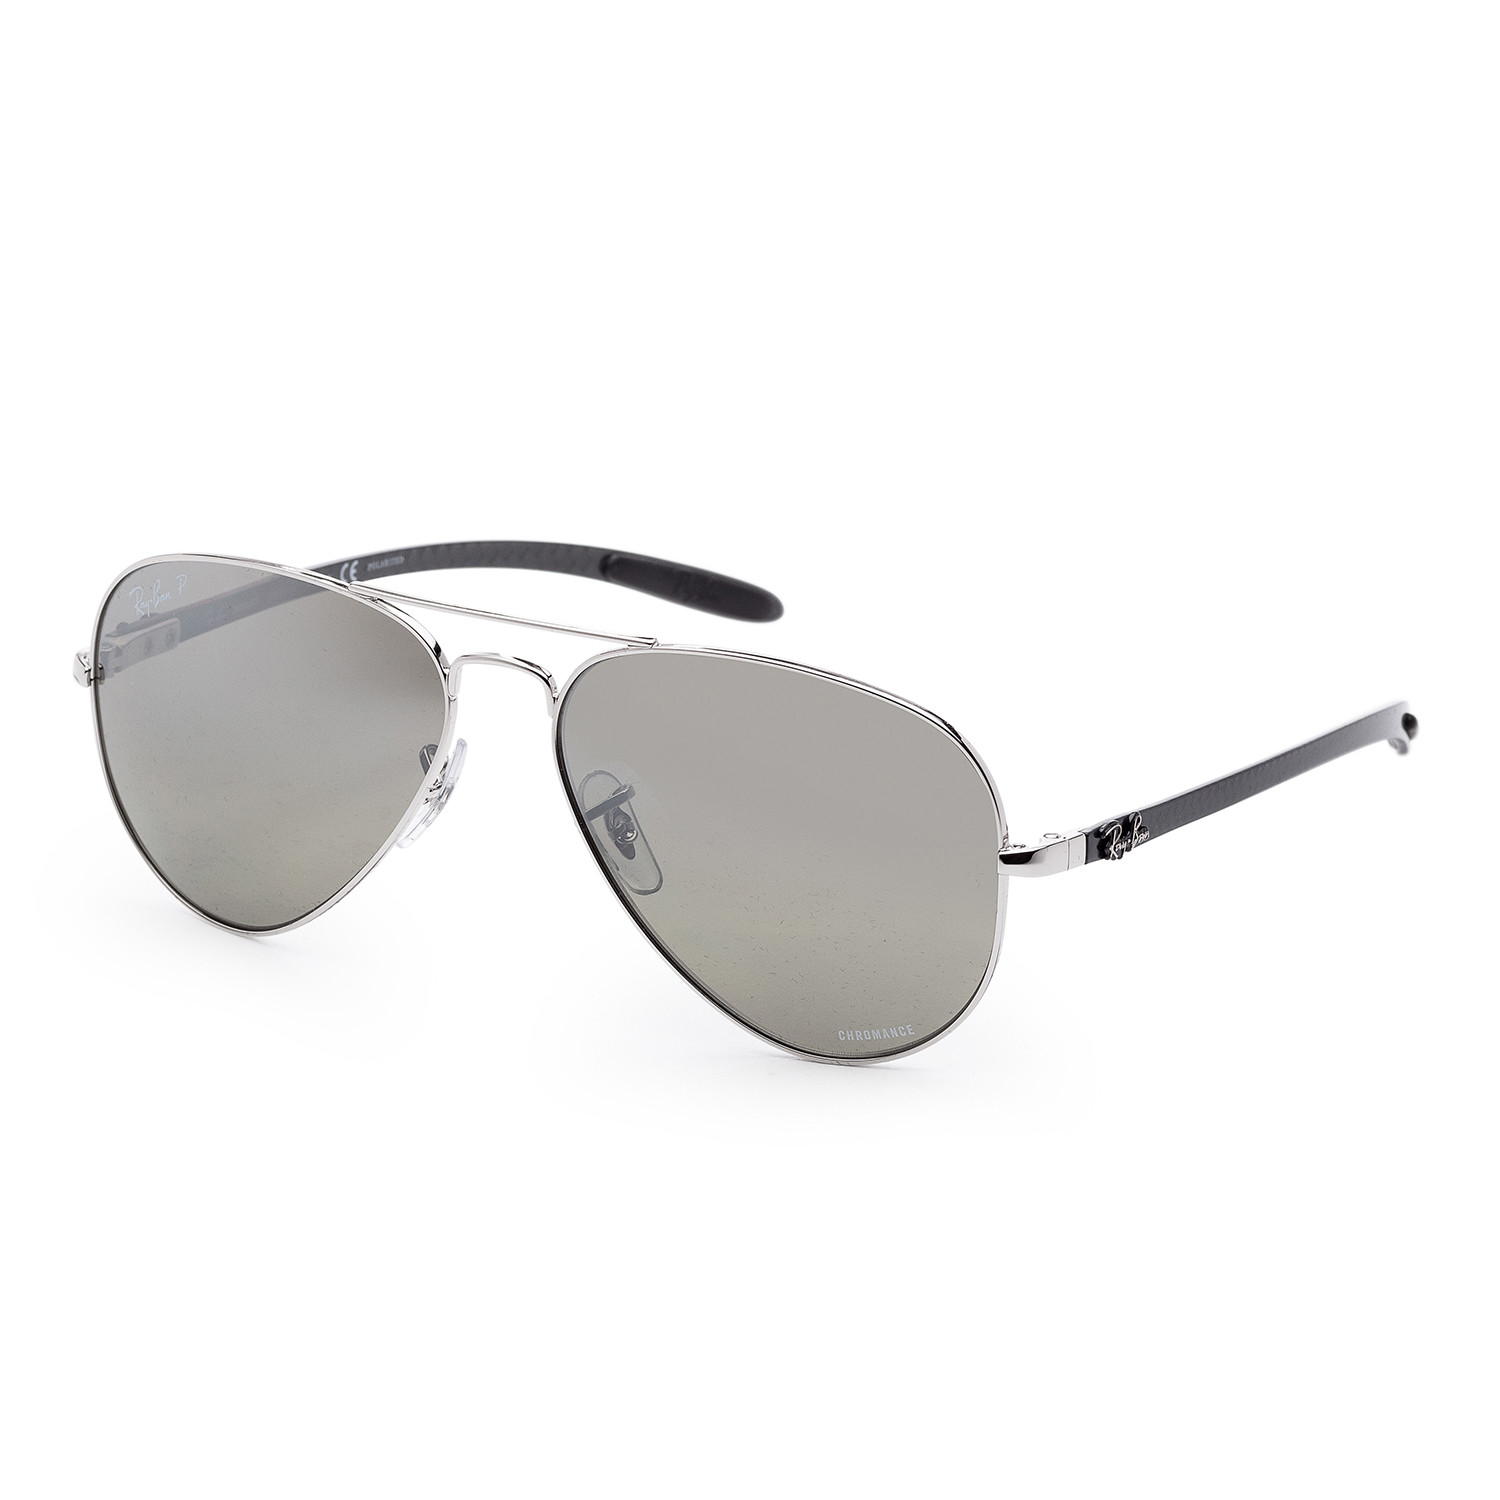 Unisex Chromance Sunglasses // 58mm // Silver Frame - Ray-Ban - Touch ...